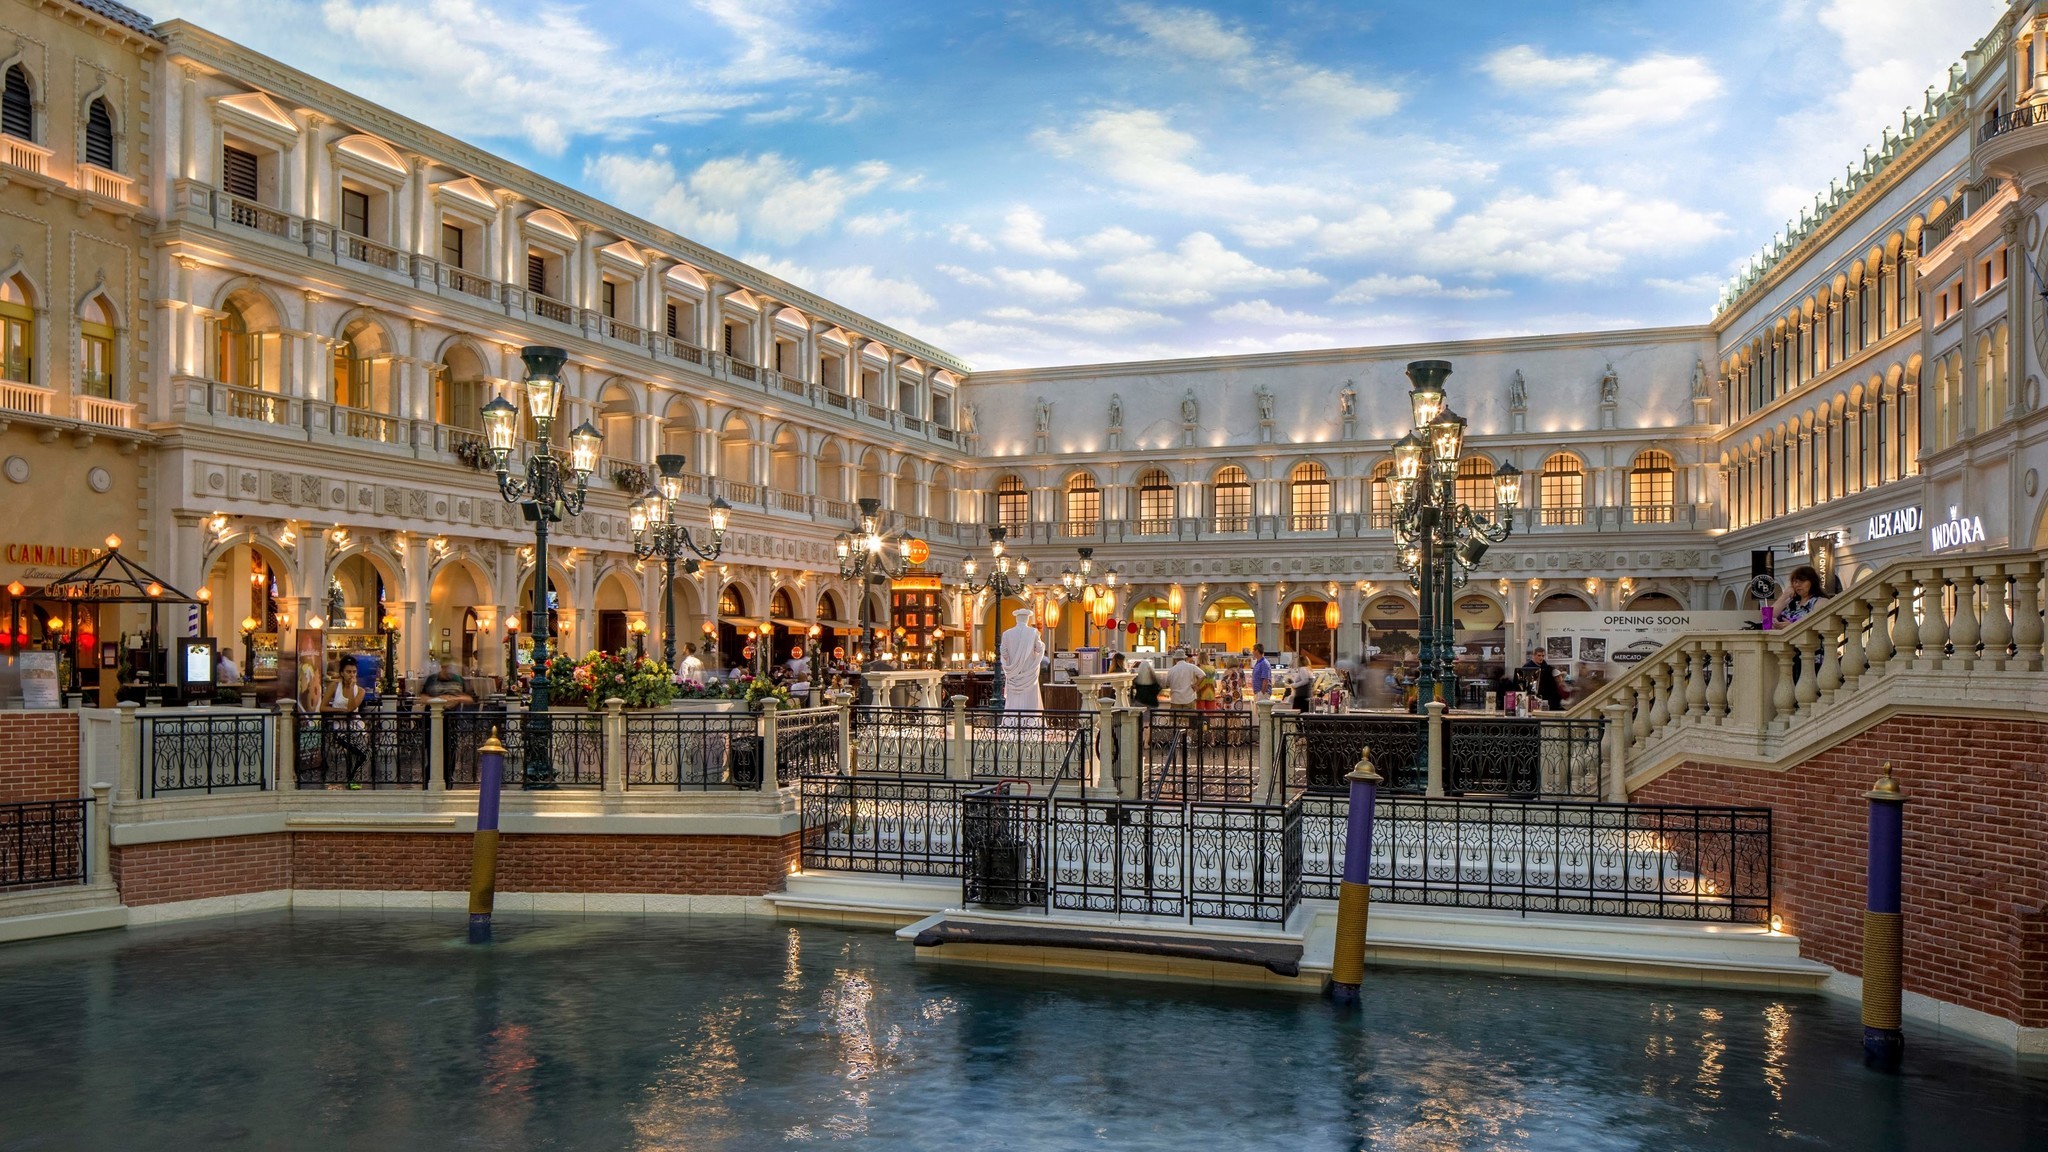 The Forum Shops’ success led the way for other themed shopping centers at resorts along the Strip. At the Venetian, the Grand Canal Shoppes opened in 1999, offering guests an opportunity to float past stores in gondolas.